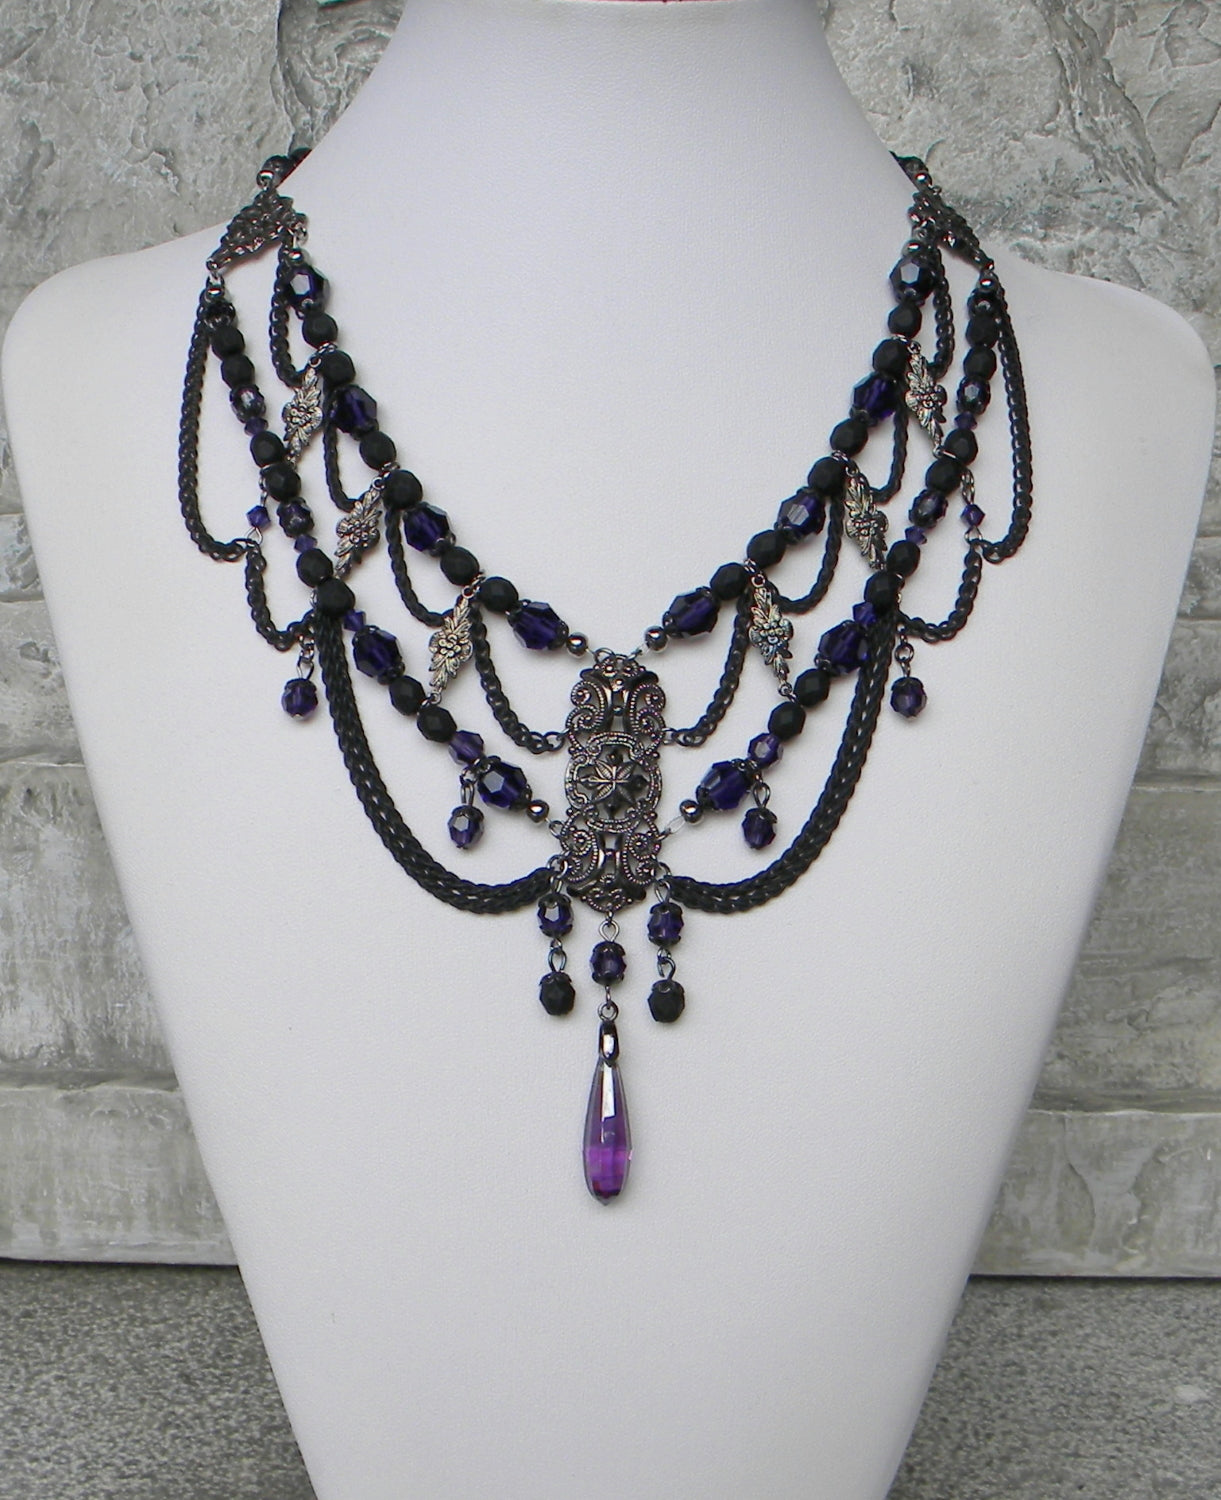 Jenna Asymmetrical Necklace in Lavender Purple Rose with Black Beads. FREE  EARRINGS